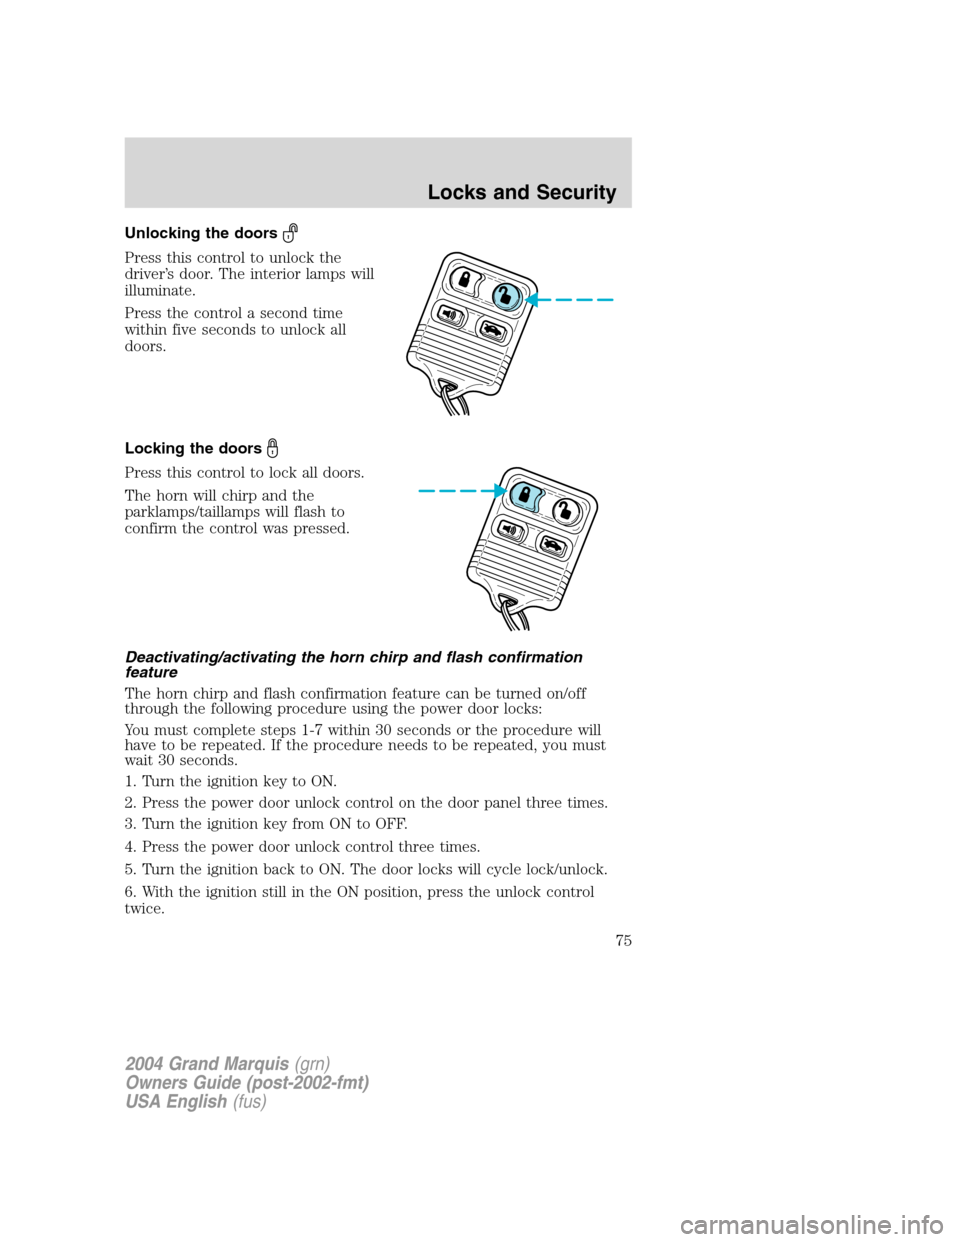 Mercury Grand Marquis 2004  s Manual PDF Unlocking the doors
Press this control to unlock the
driver’s door. The interior lamps will
illuminate.
Press the control a second time
within five seconds to unlock all
doors.
Locking the doors
Pre